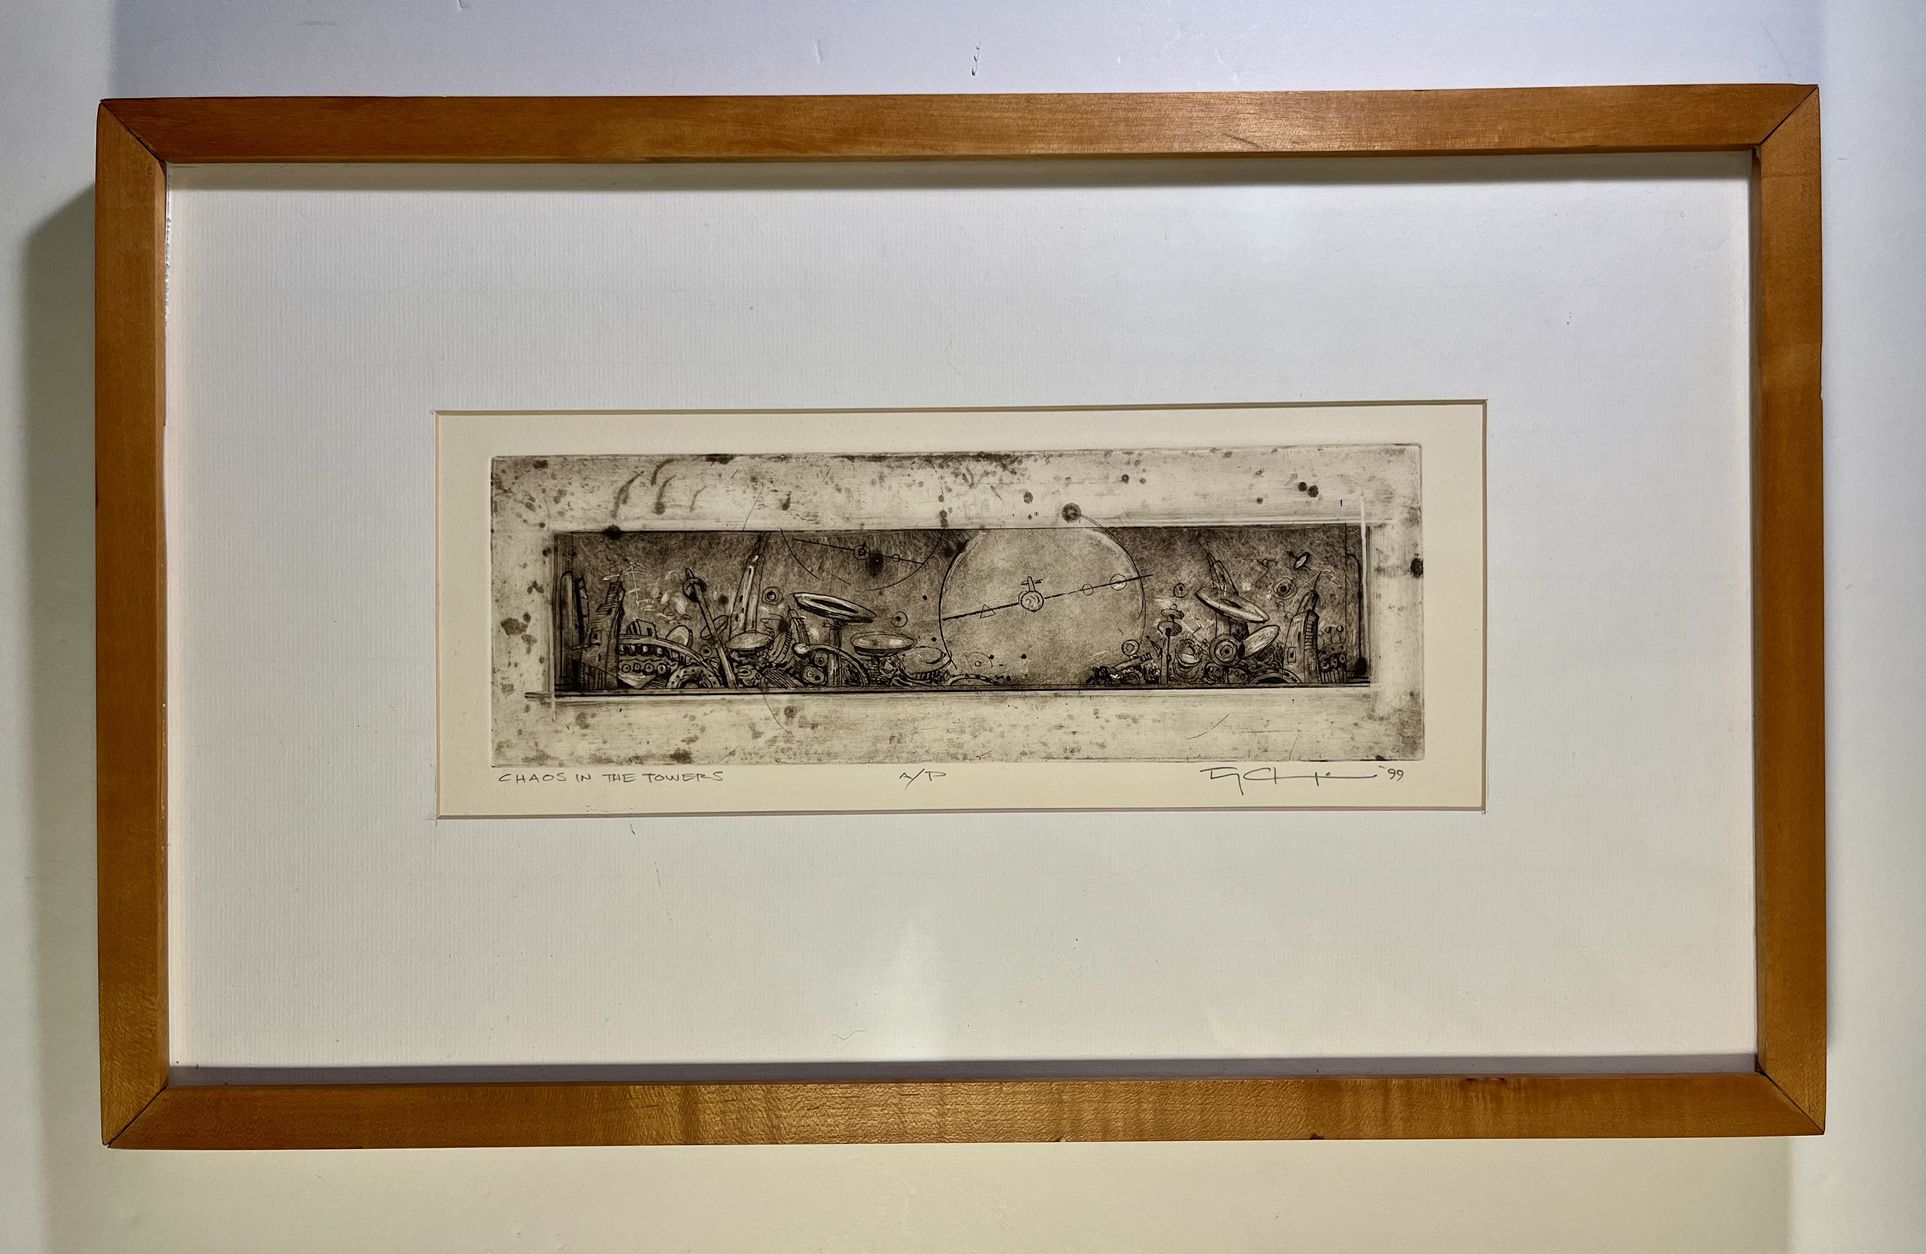 1999 Etching CHAOS IN THE TOWERS / Artist Proof / Signed by the Artist